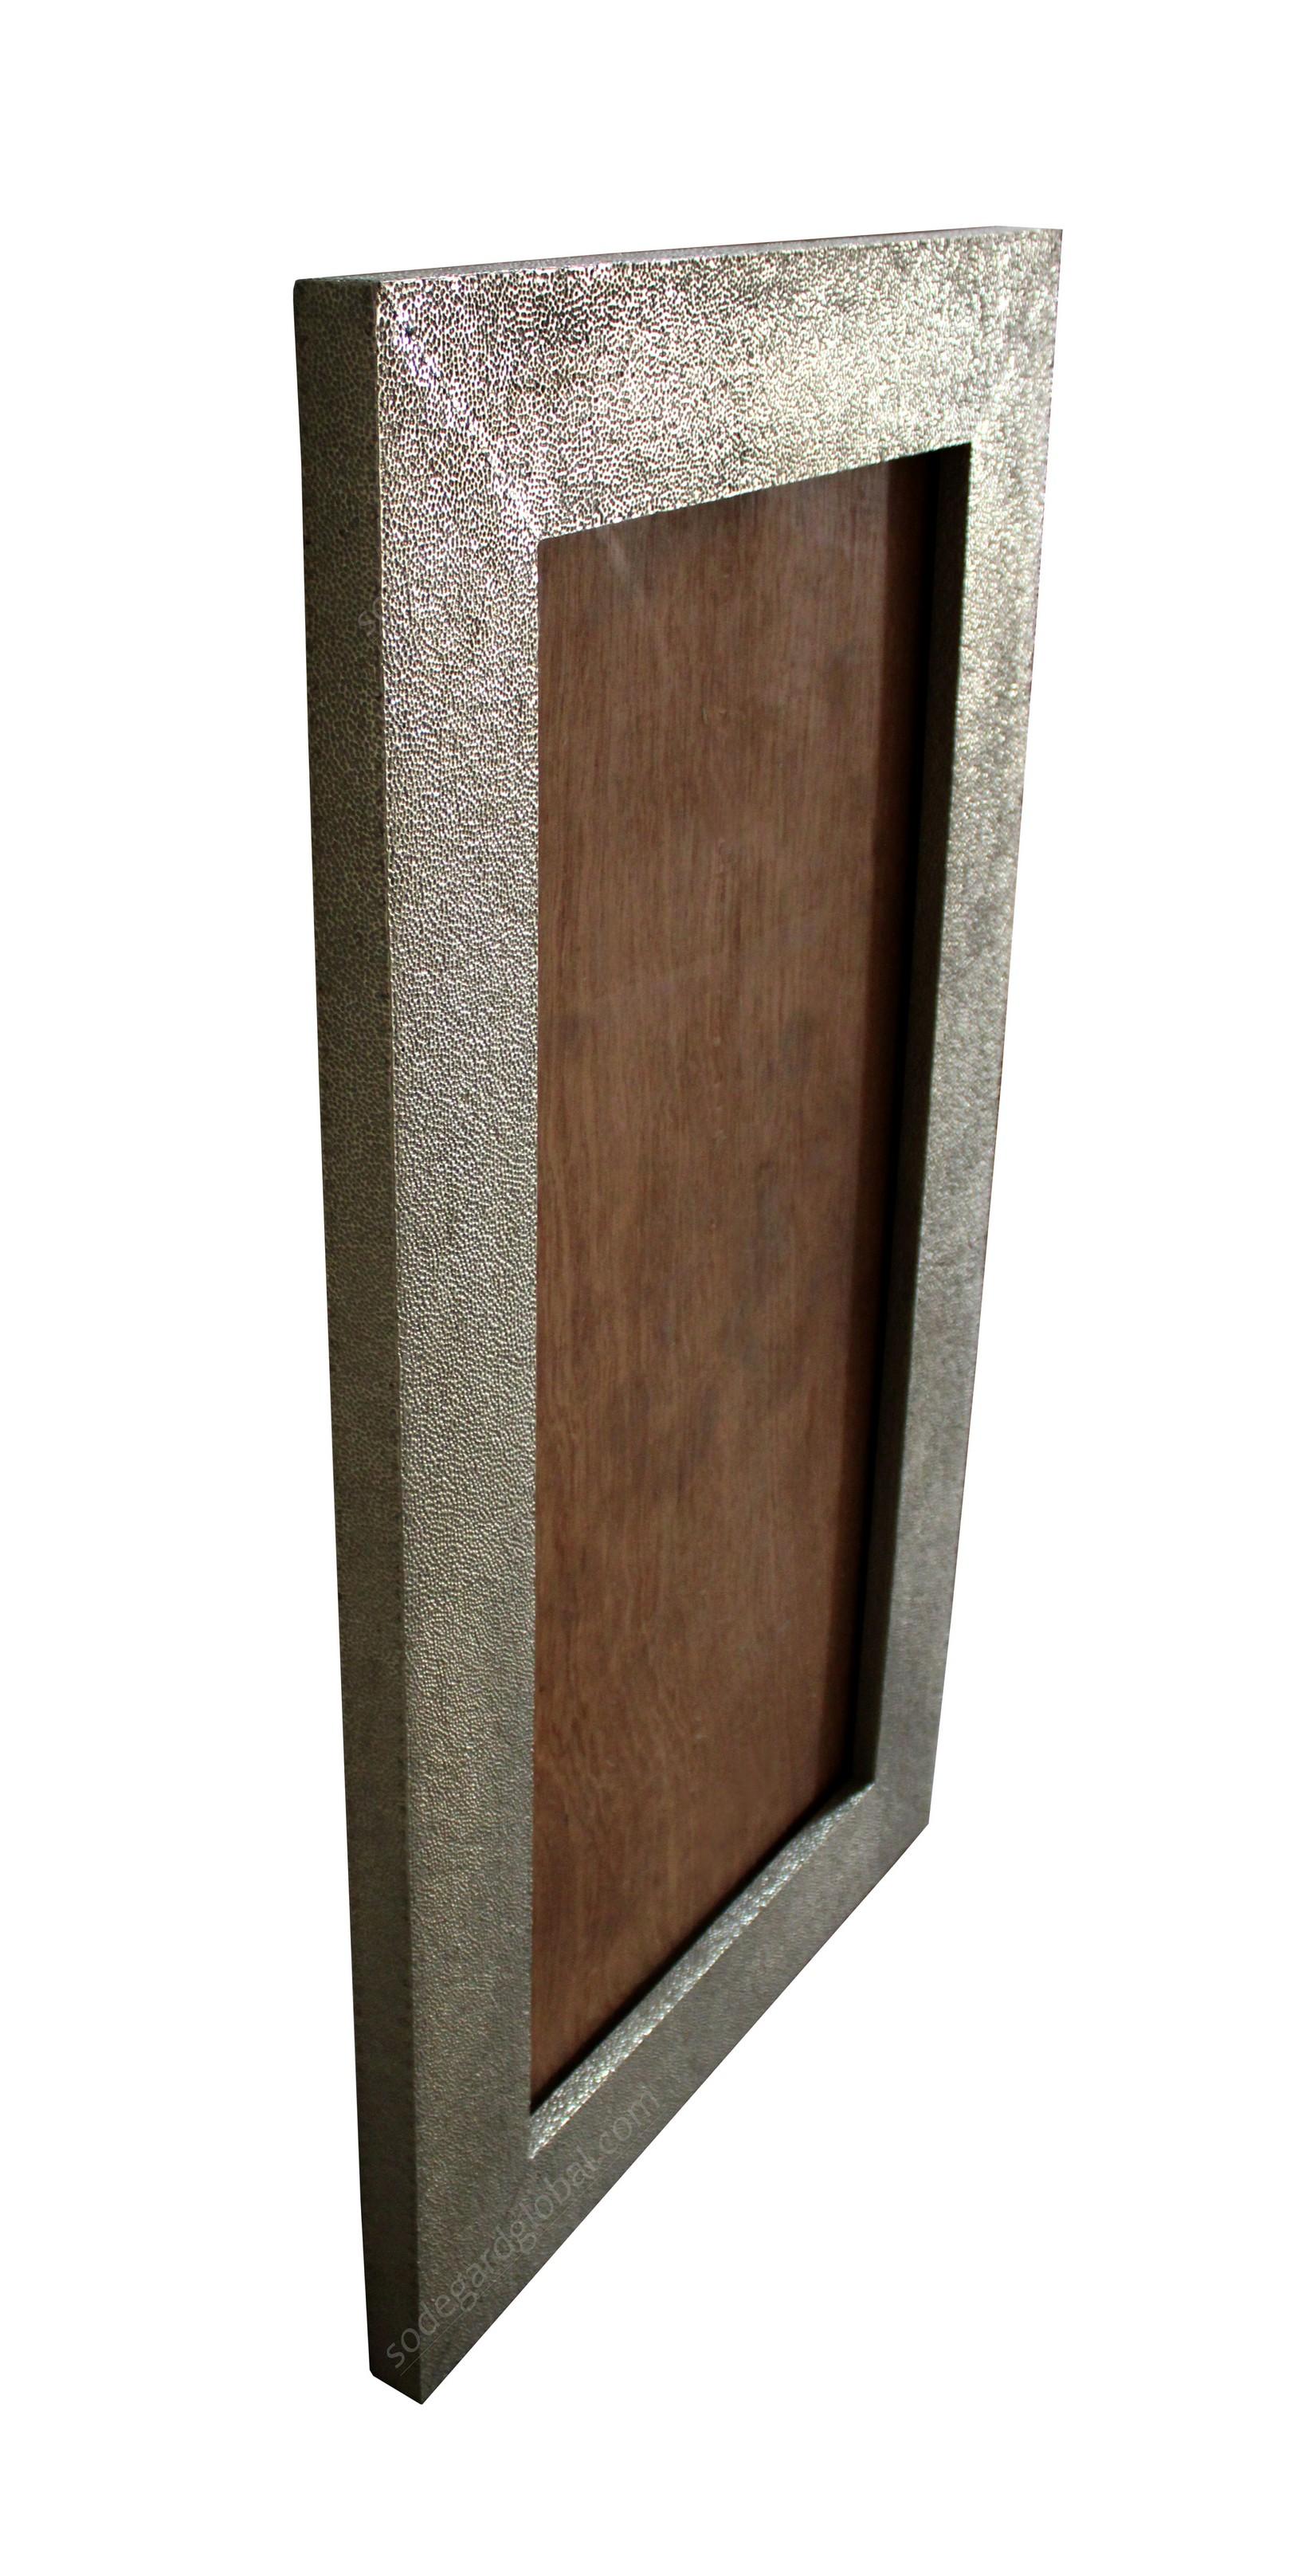 Available sizes: 26” x 1” x 34” H
 
A simple rectangular mirror frame. The metal sheets are attached and covering the entire outside surface of the piece. The available options for metal cladding are brass, white bronze, antiqued bronze, silver and